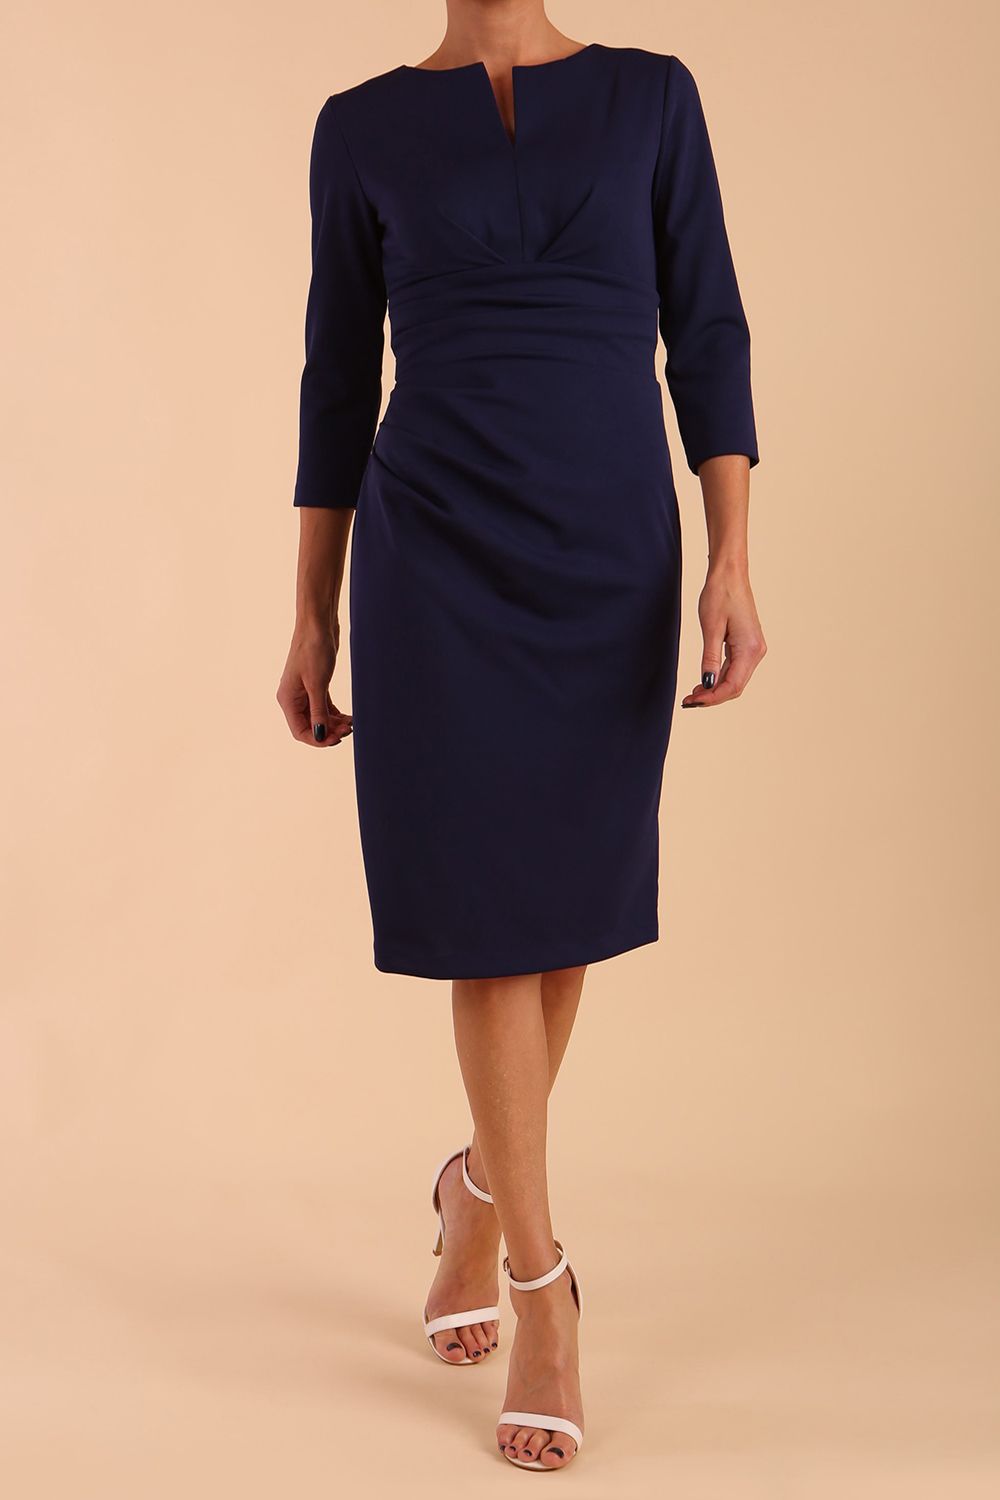 model wearing diva catwalk donna pencil dress with wide band and sleeves and rounded neckline with low split in navy blue colour front